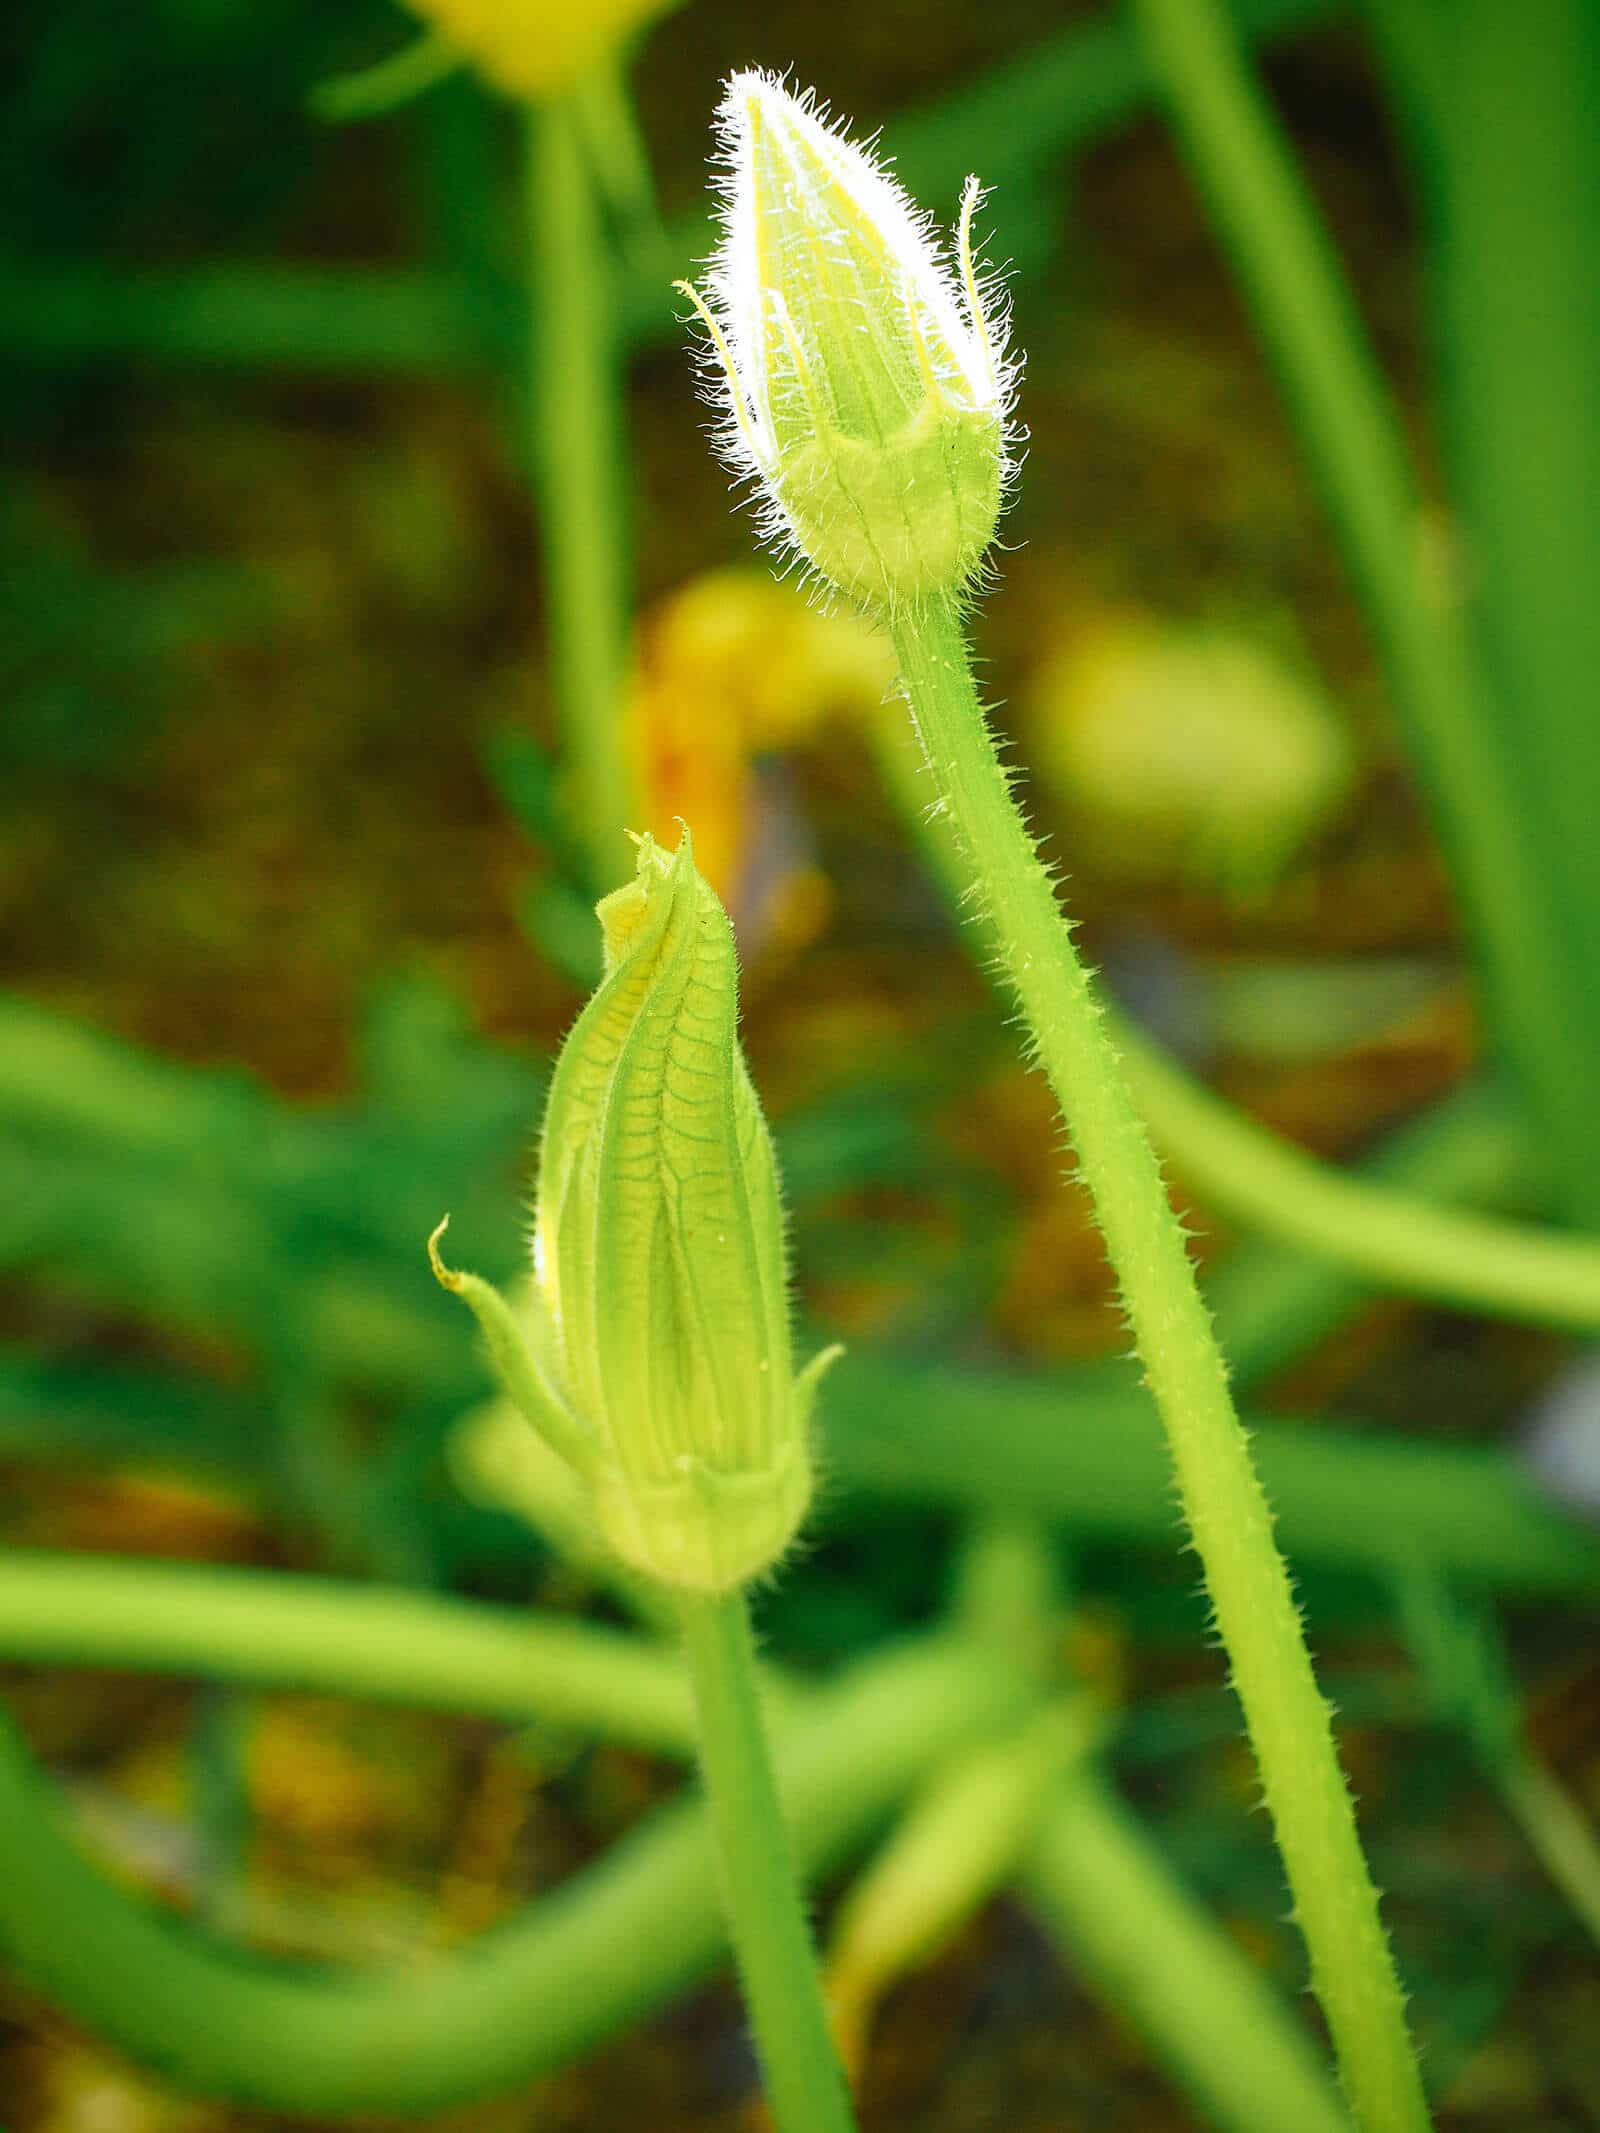 Male squash flowers growing on long, thin stems